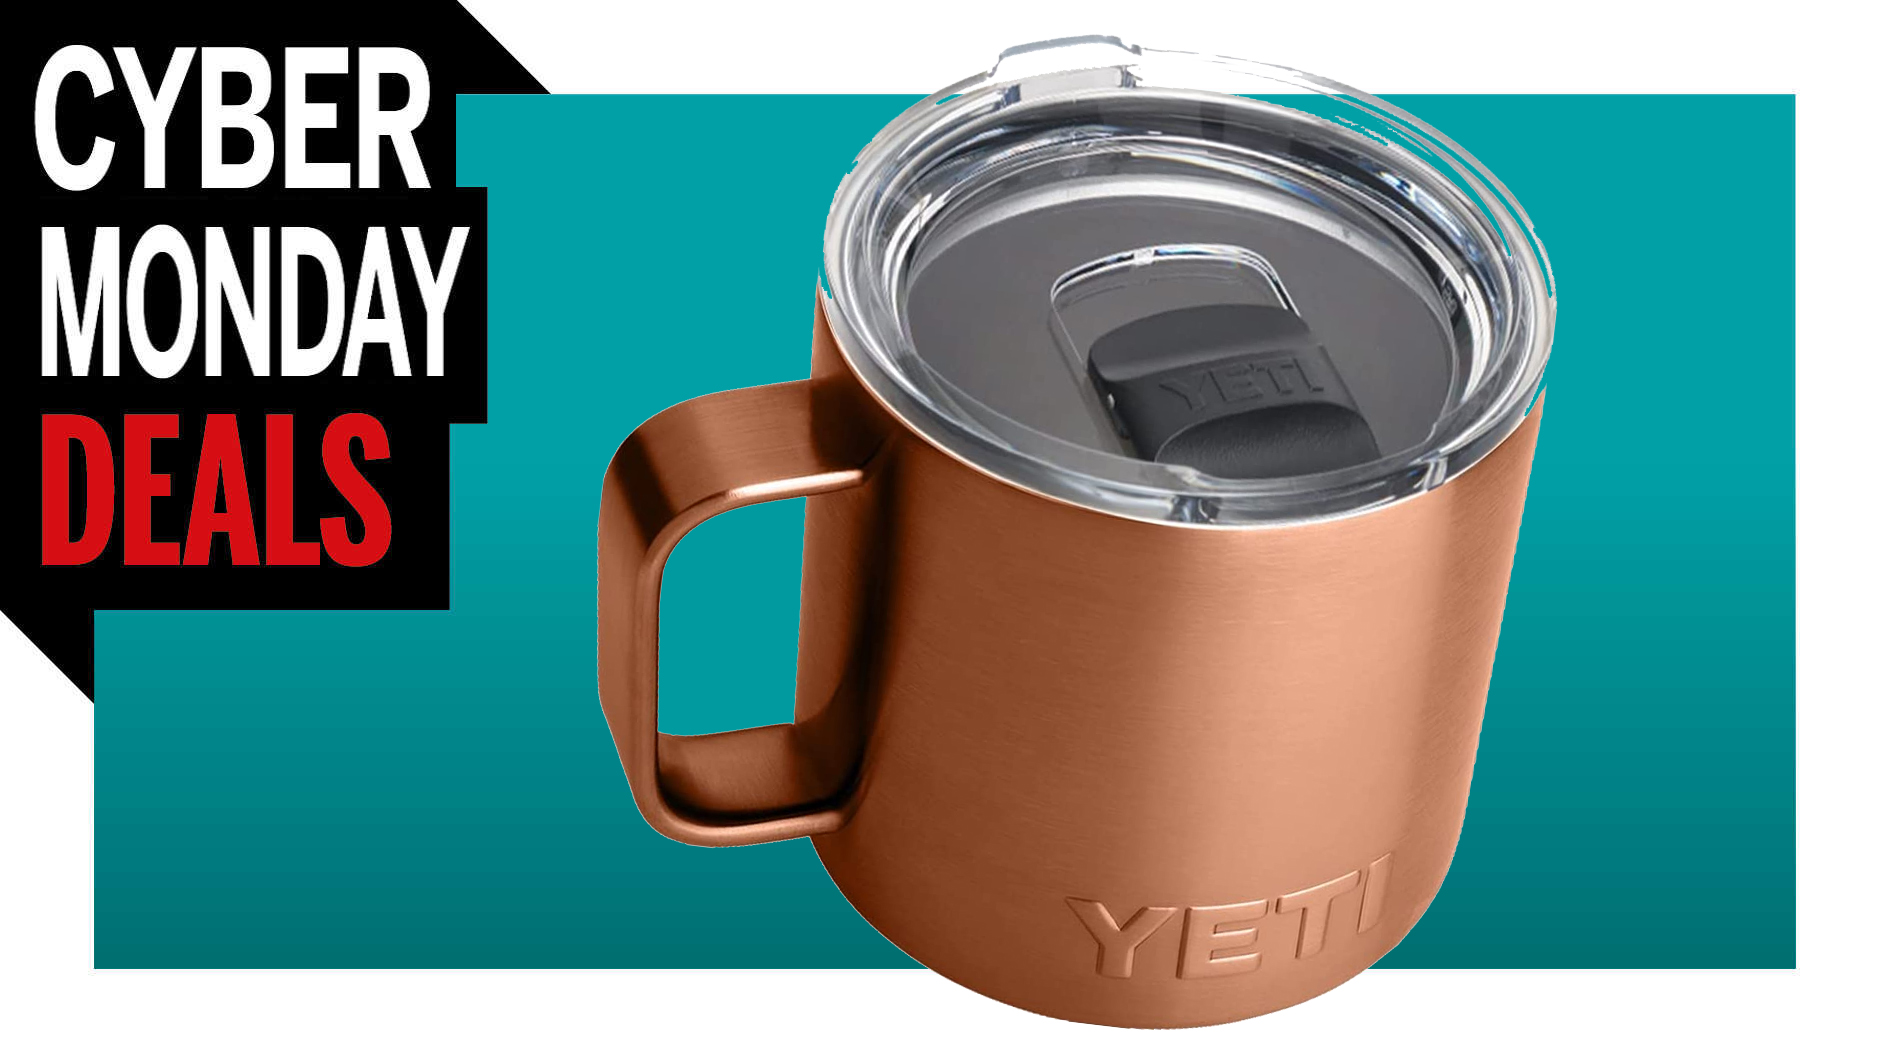 YETI - For coffee time, our insulated mugs keep coffee hot and